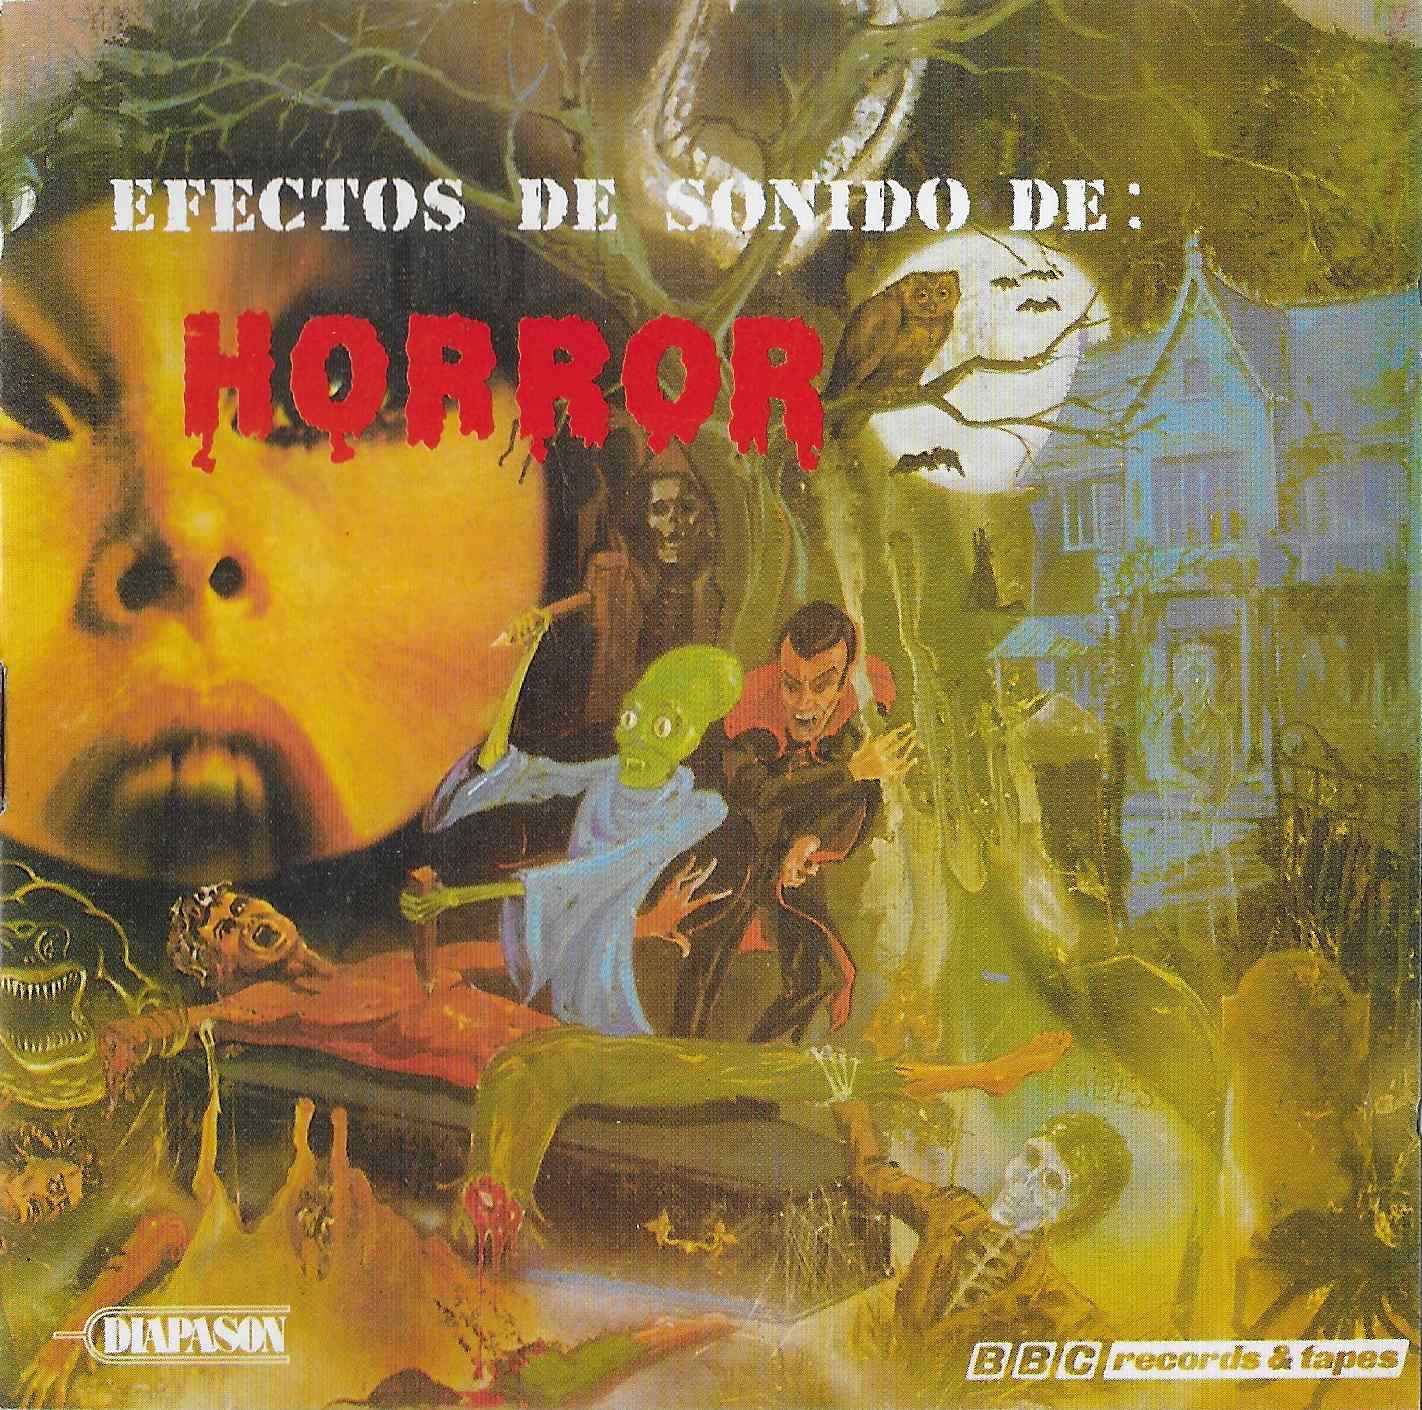 Picture of 95 0030 Efectos de sonido de horror (Spanish import) CD by artist Various from the BBC records and Tapes library